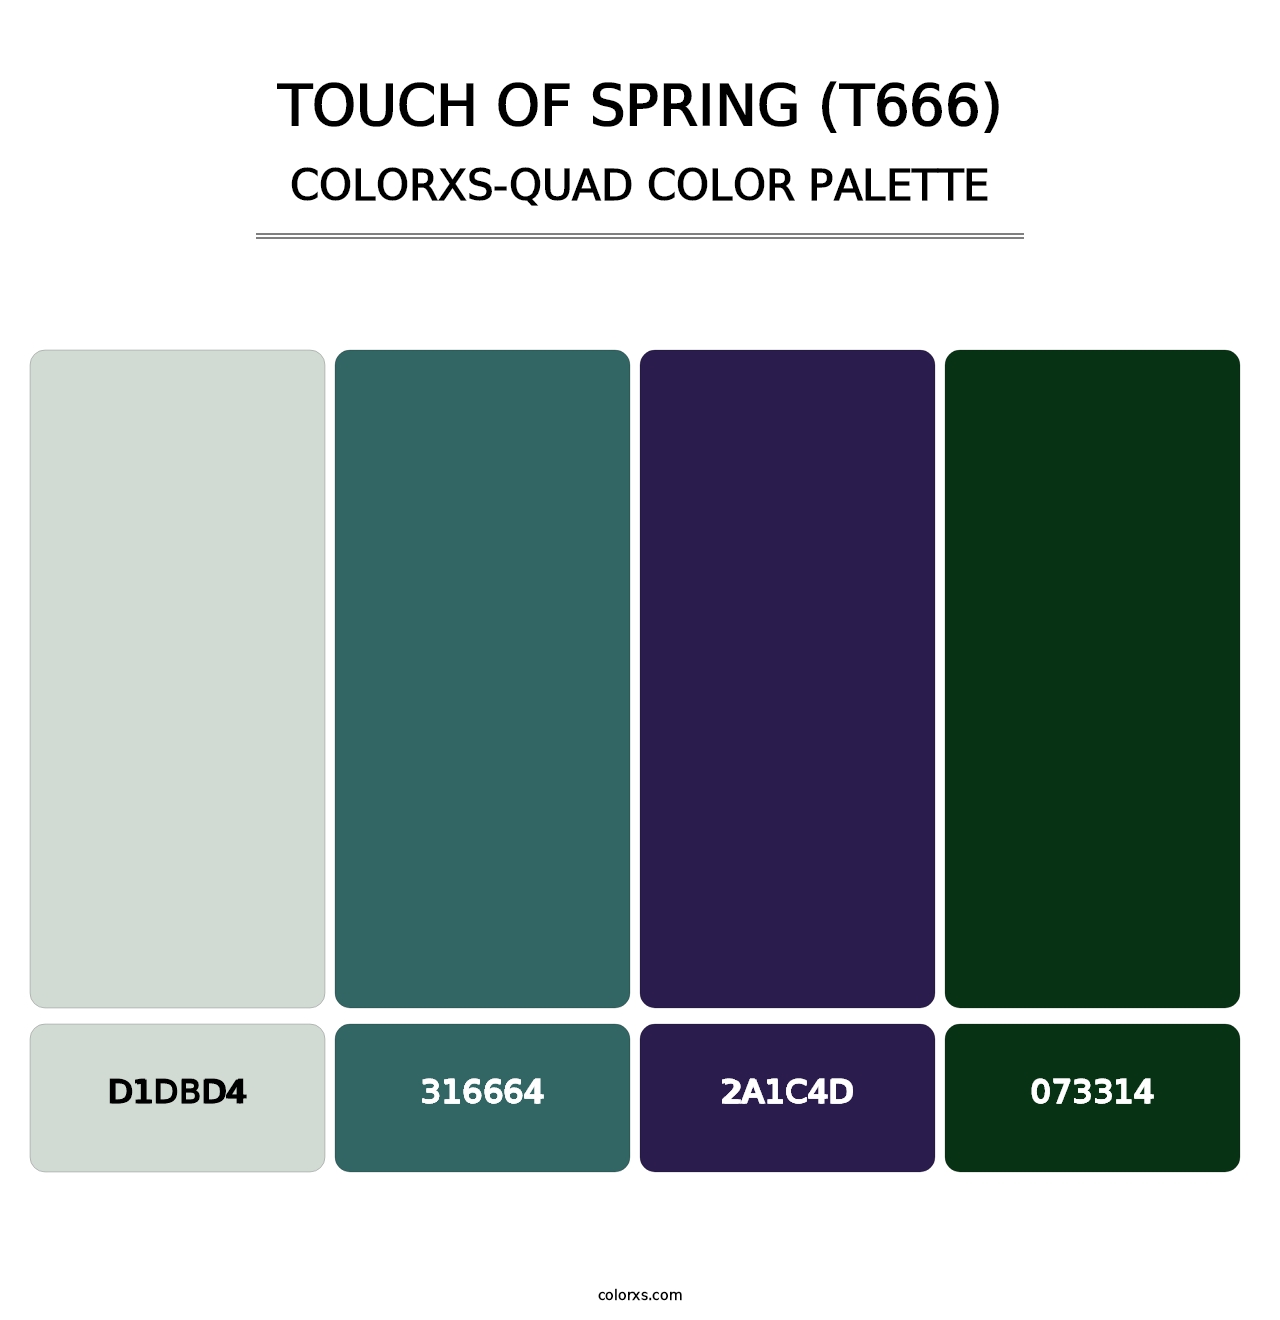 Touch of Spring (T666) - Colorxs Quad Palette